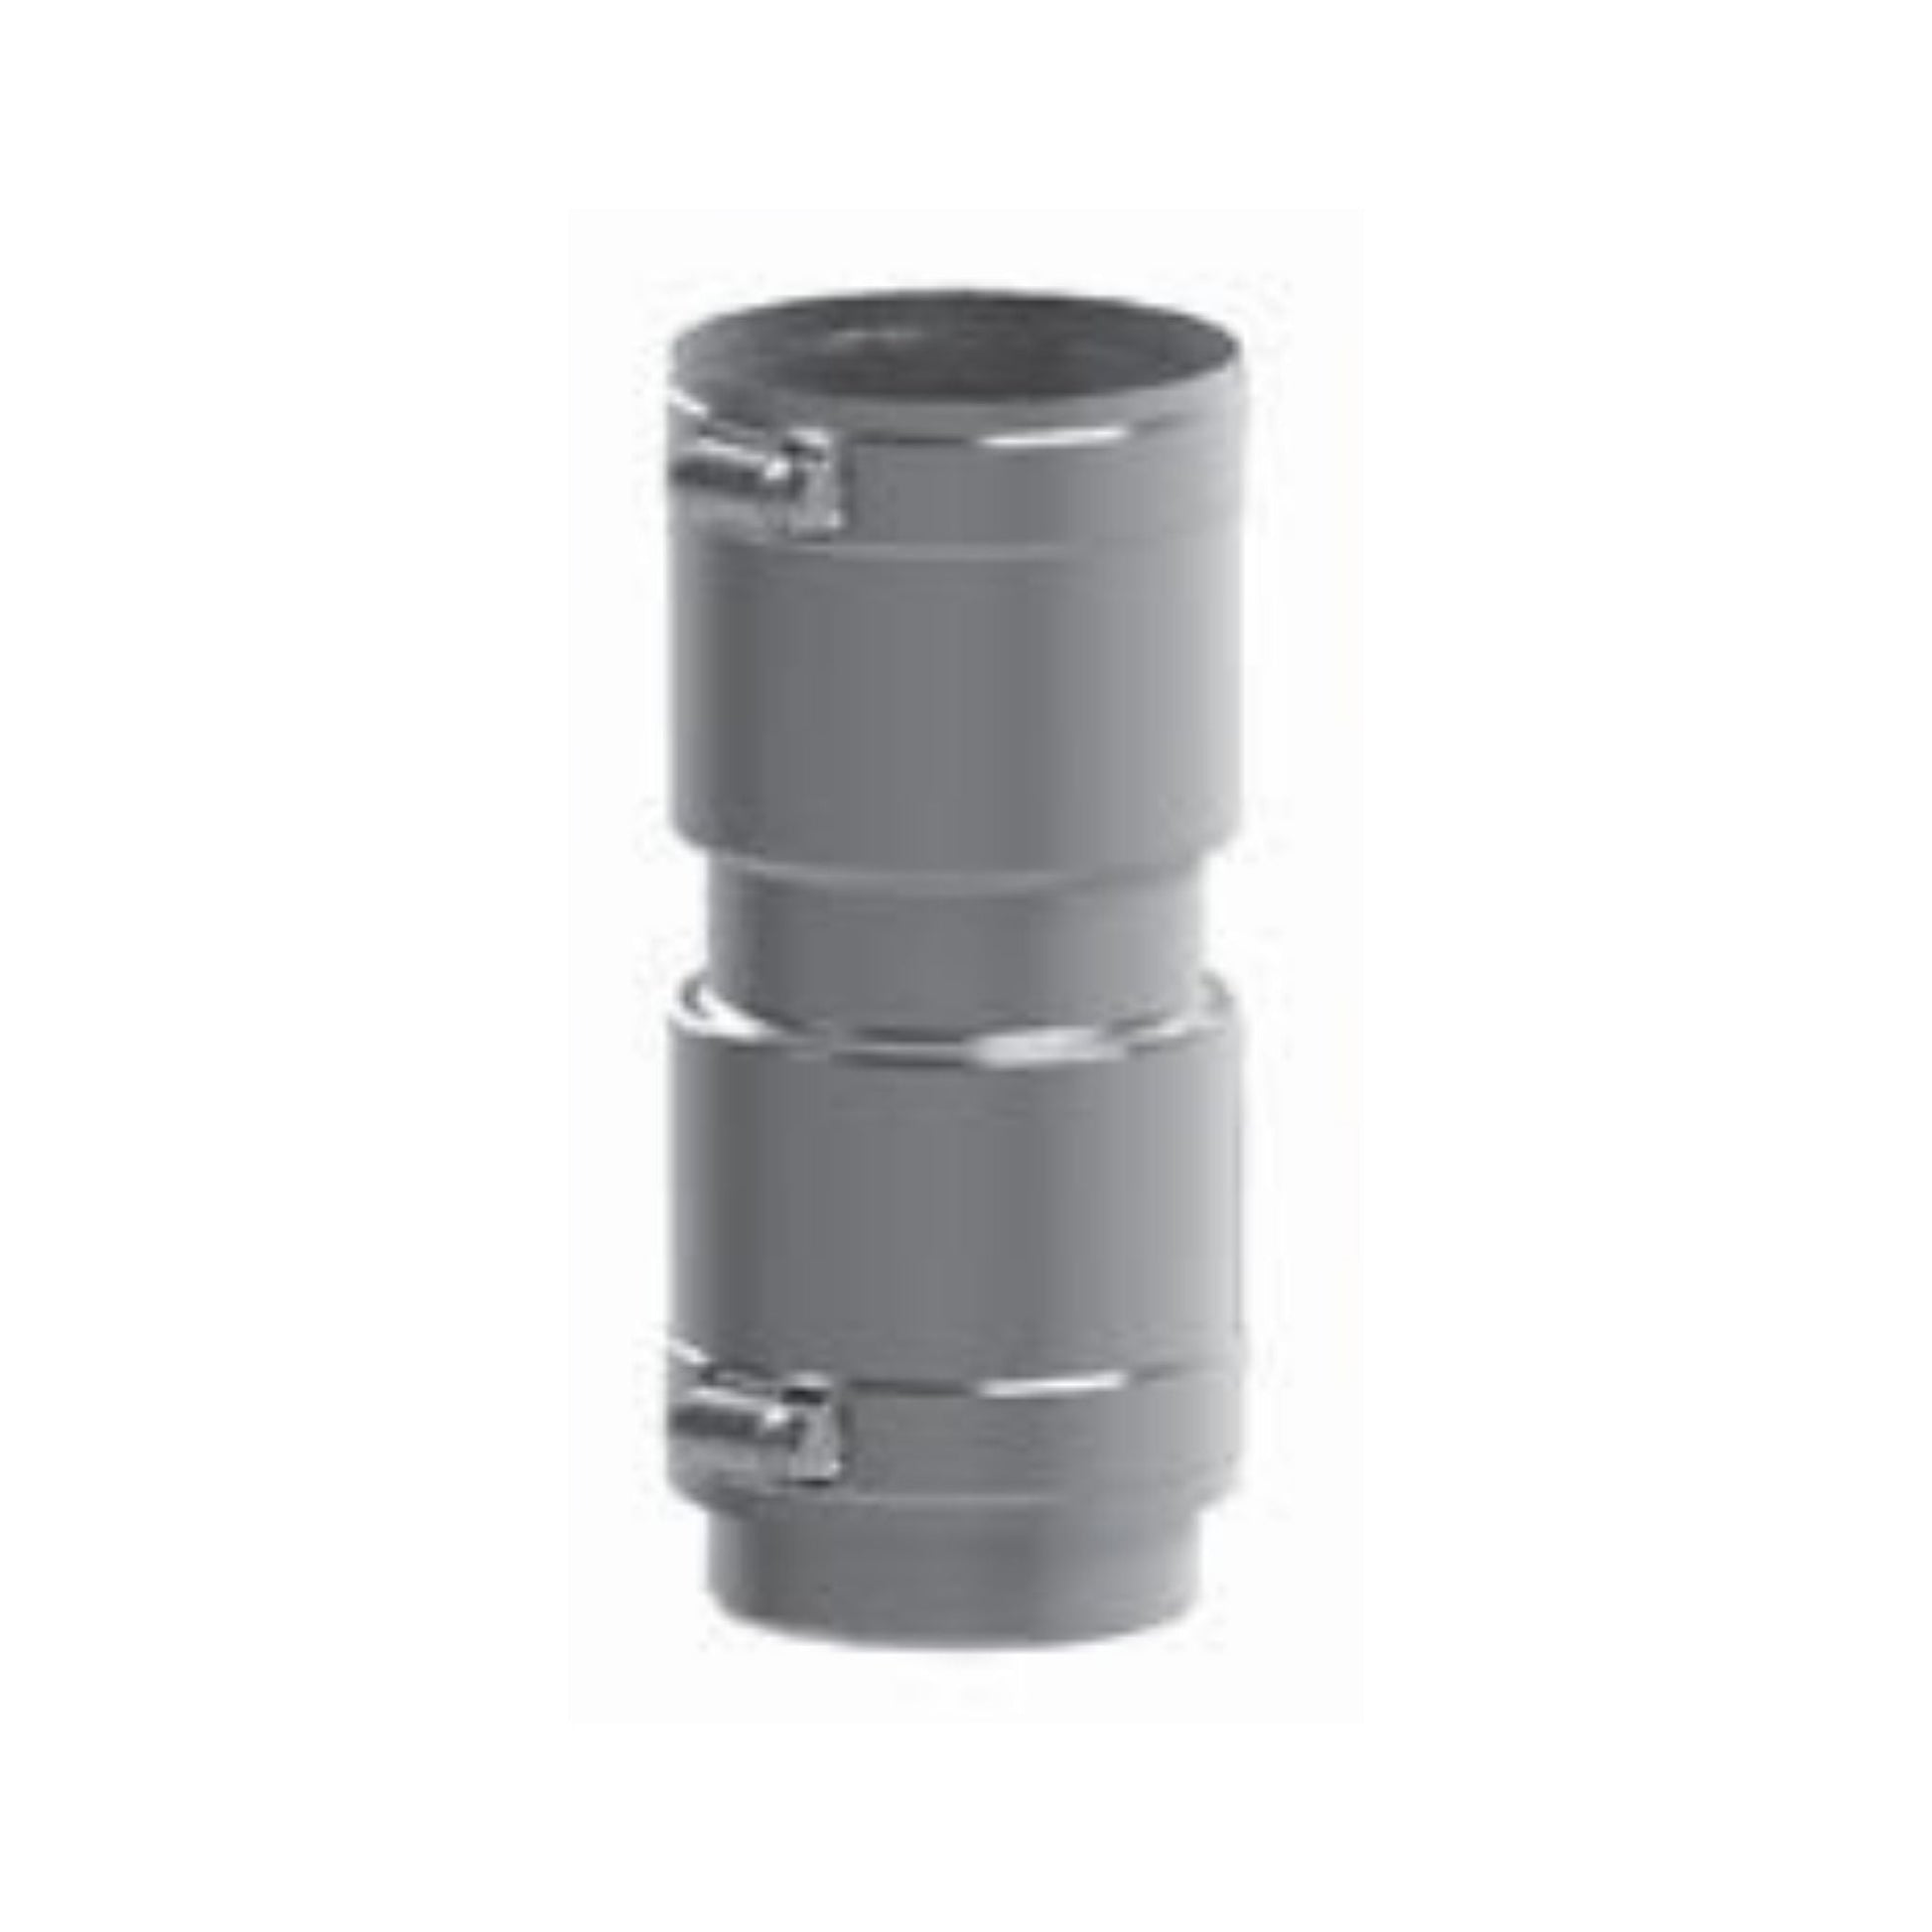 DuraVent FasNSeal Flex 4" Stainless Steel Coupler